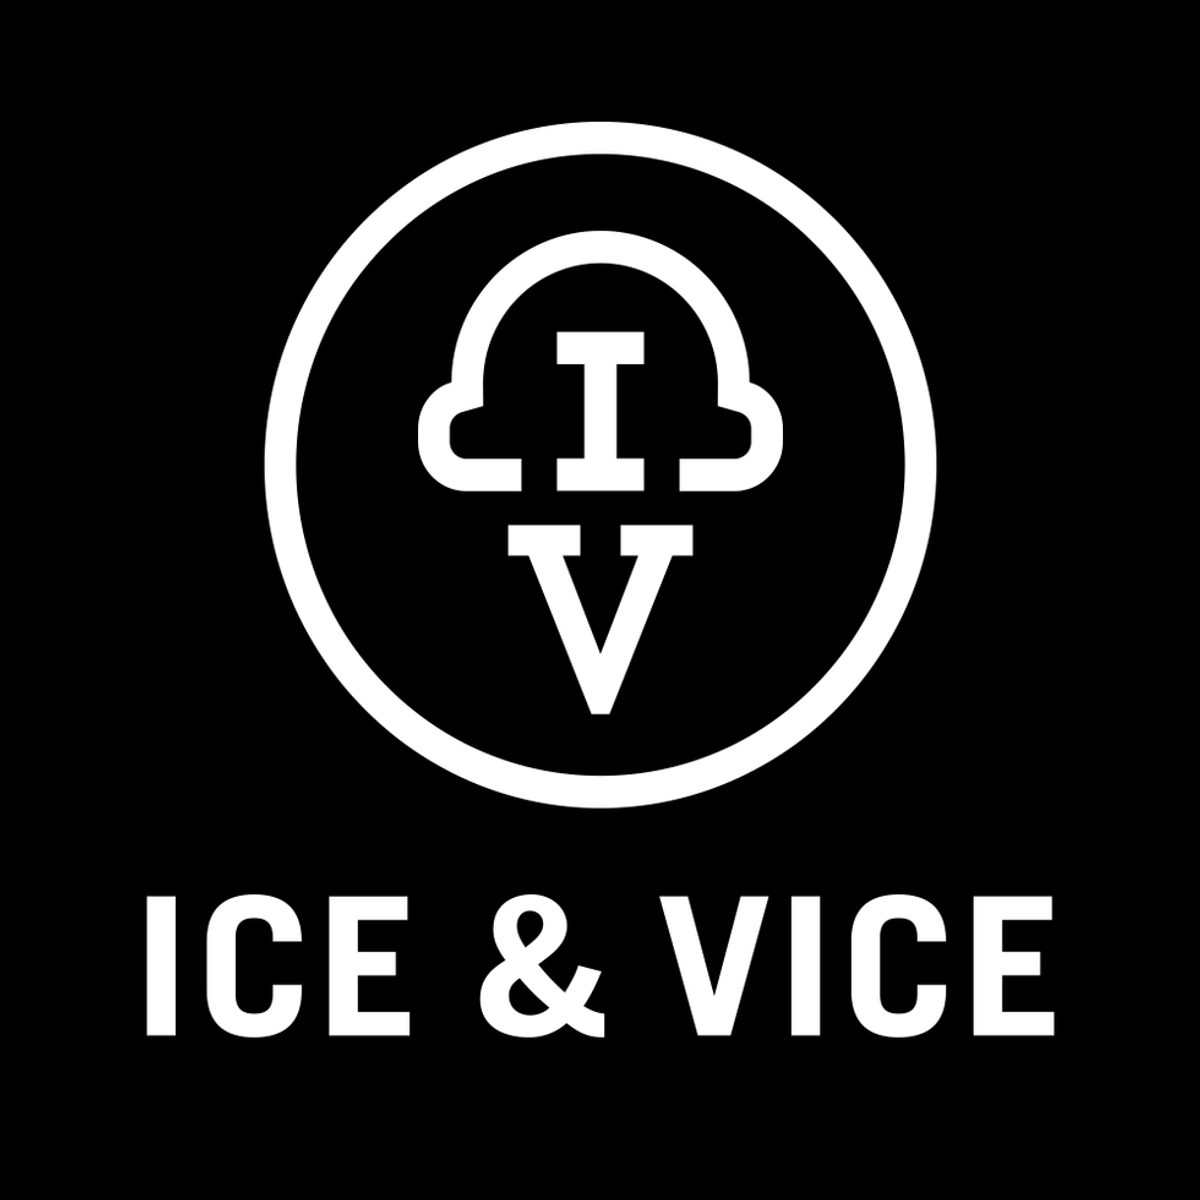 Finding The Best Ice Cream In NYC: Ice & Vice